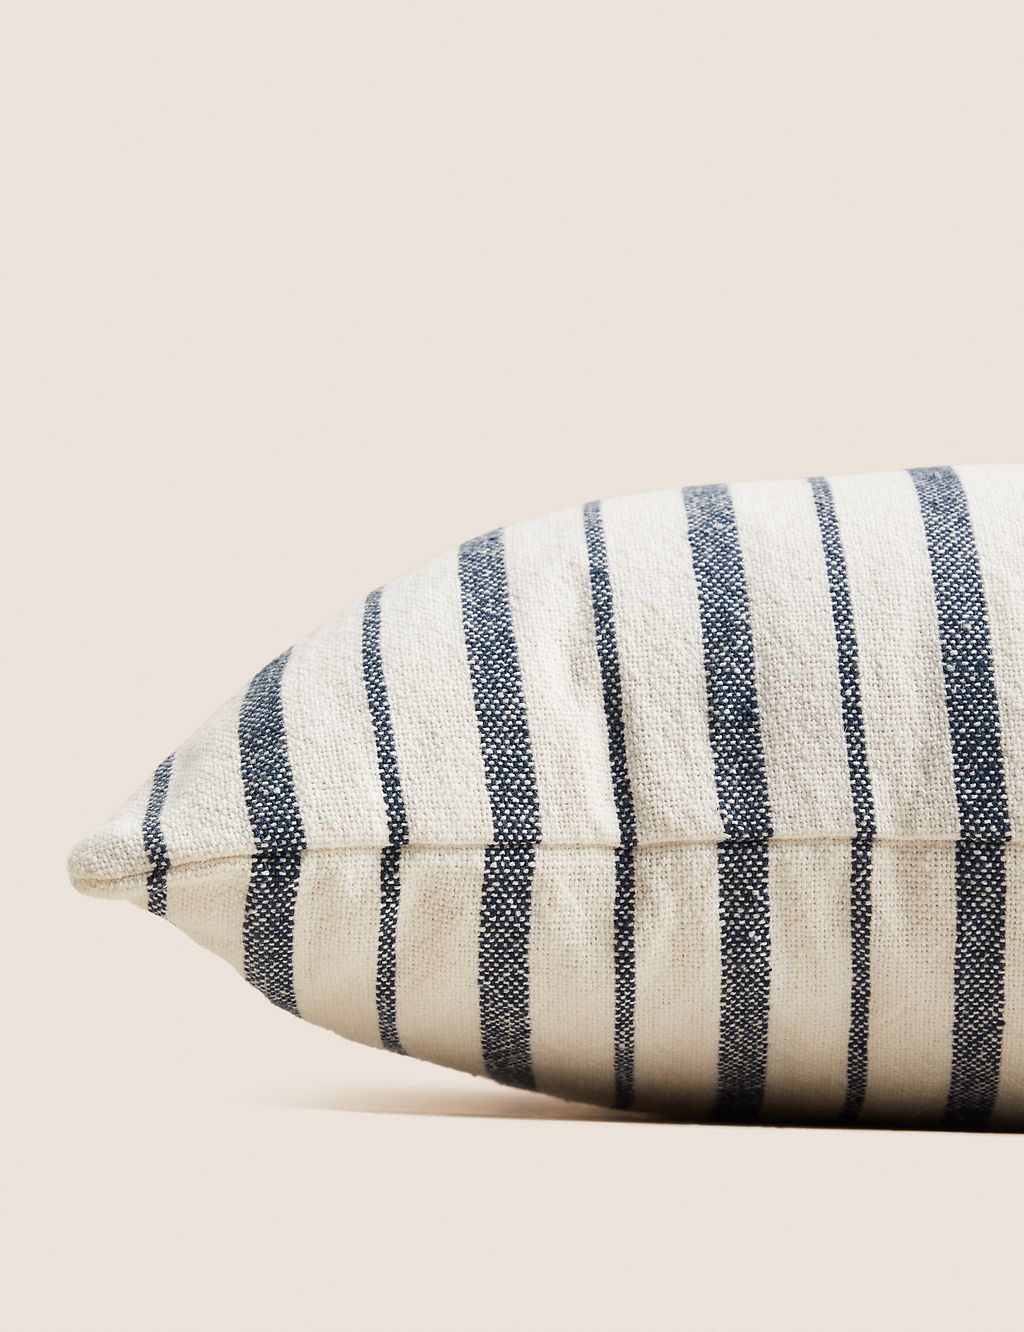 Pure Cotton Striped Bolster Cushion 1 of 5